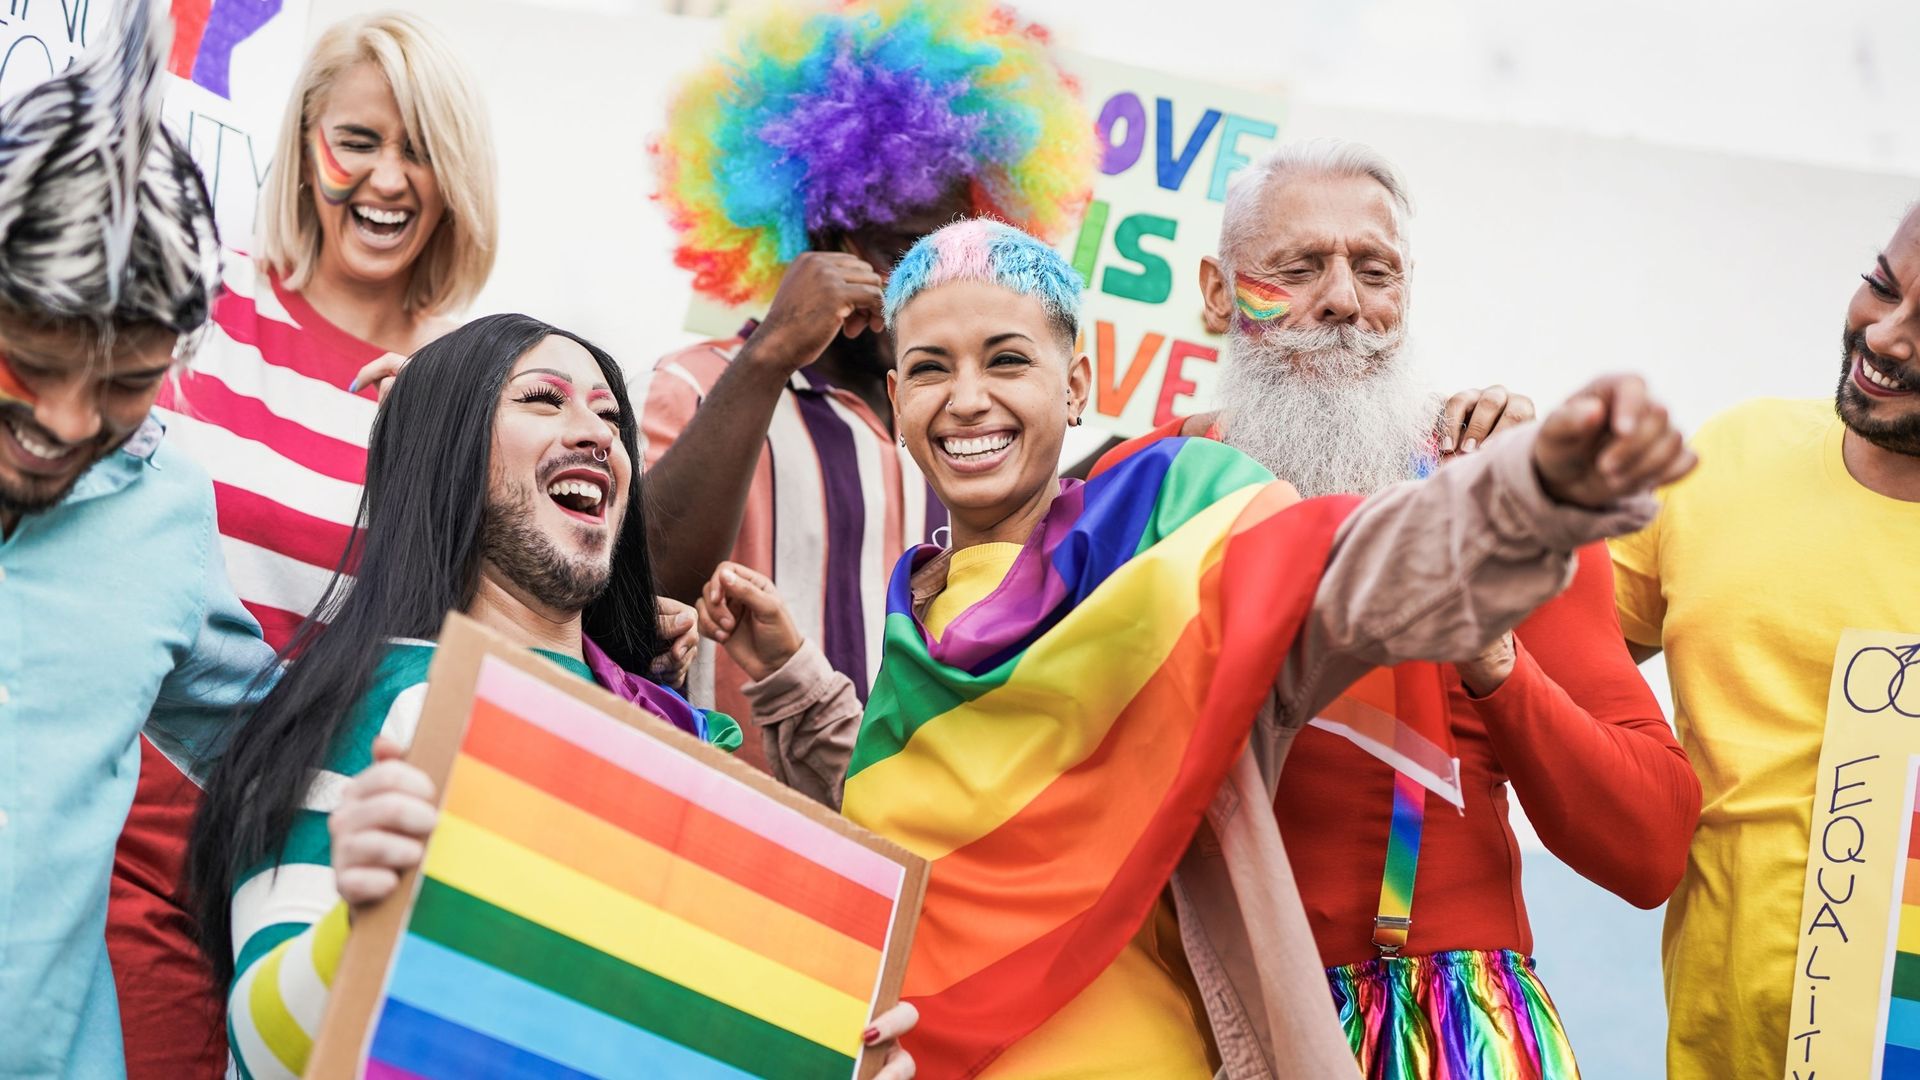 People from different generations have fun at gay pride parade with banner – Lgbt and homosexual love concept